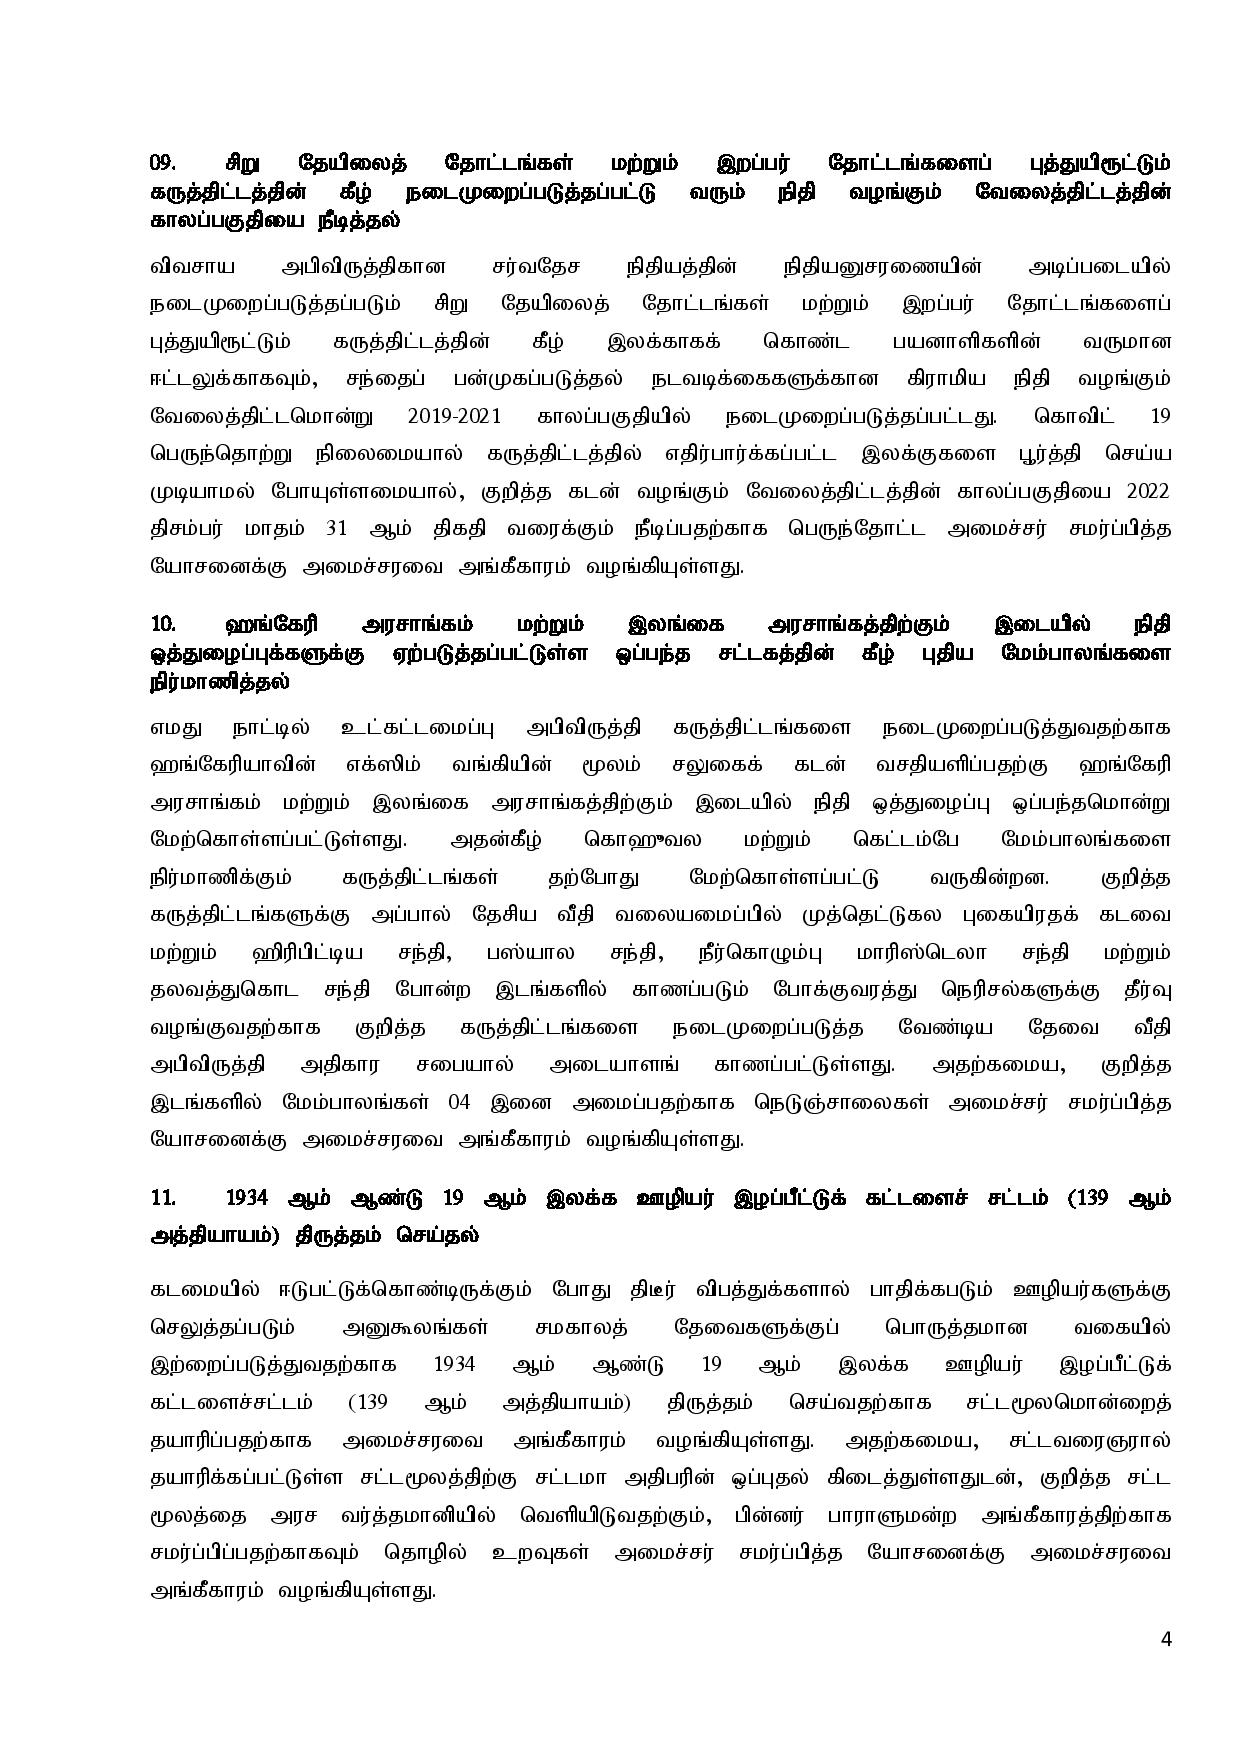 Cabinet Decisions on 18.01.2022 Tamil page 004